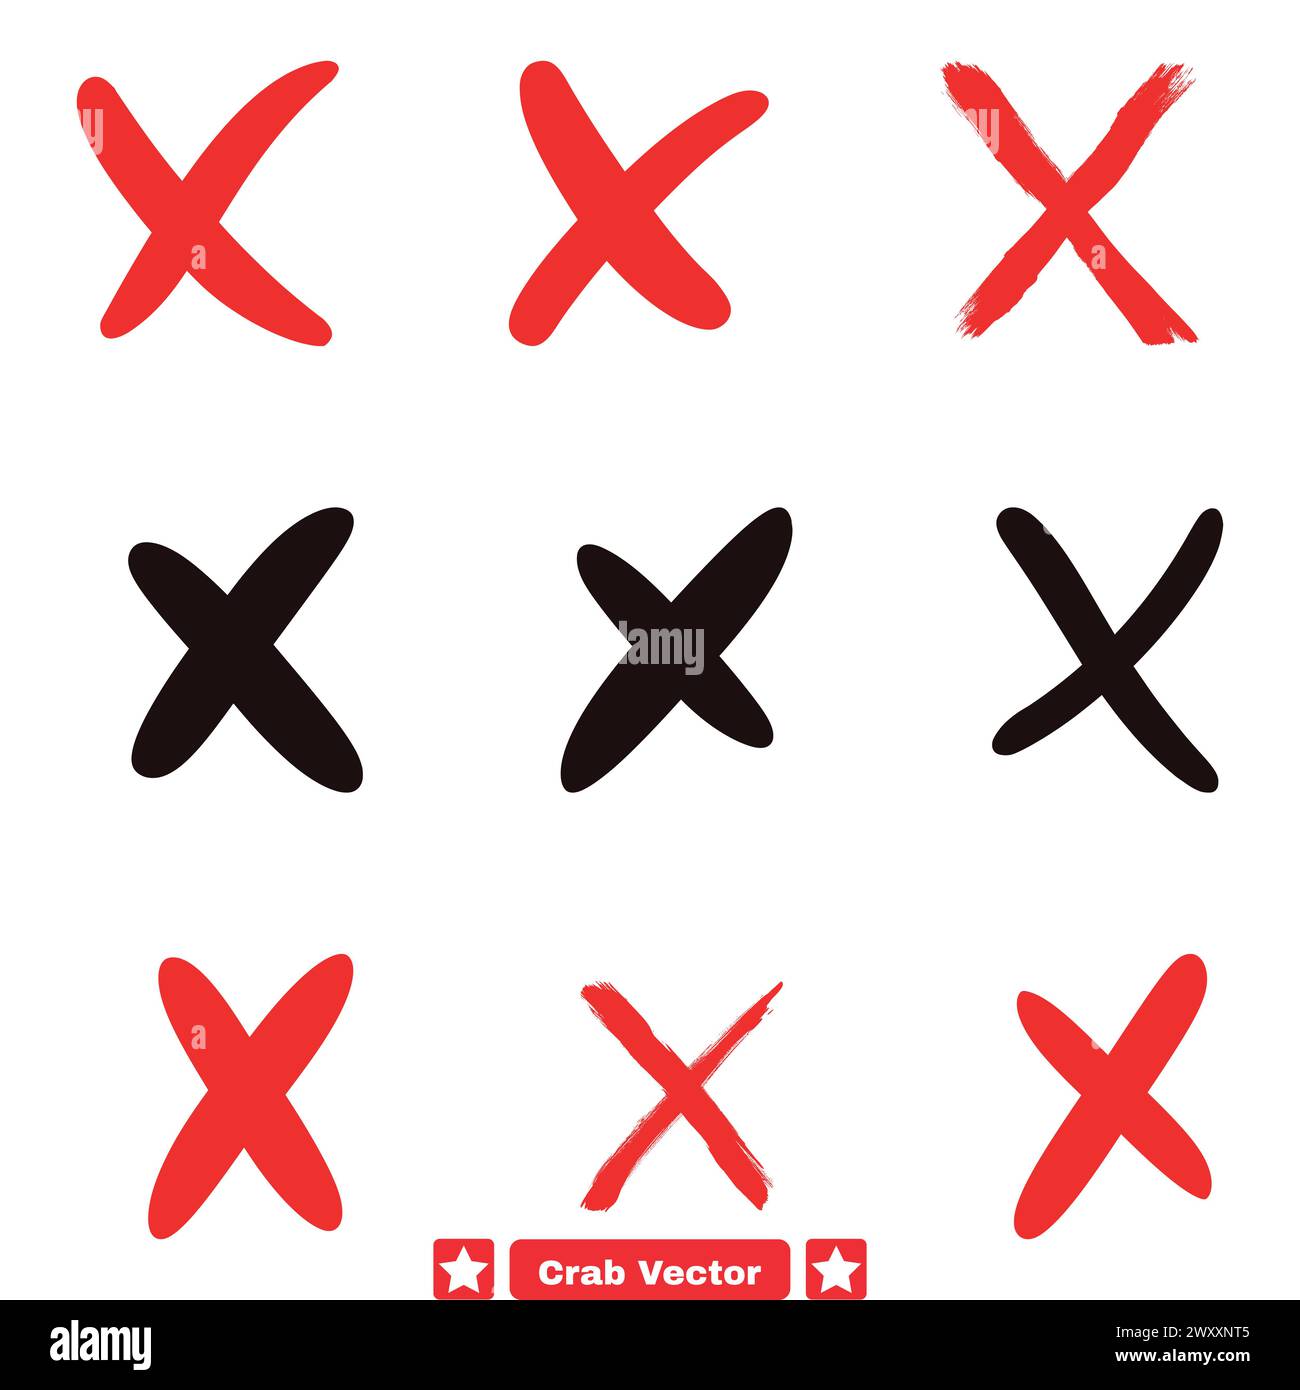 Wrong Mark Silhouette Collection Symbolic Icons of Errors, Mistakes, and Incorrectness in Vector Form Stock Vector